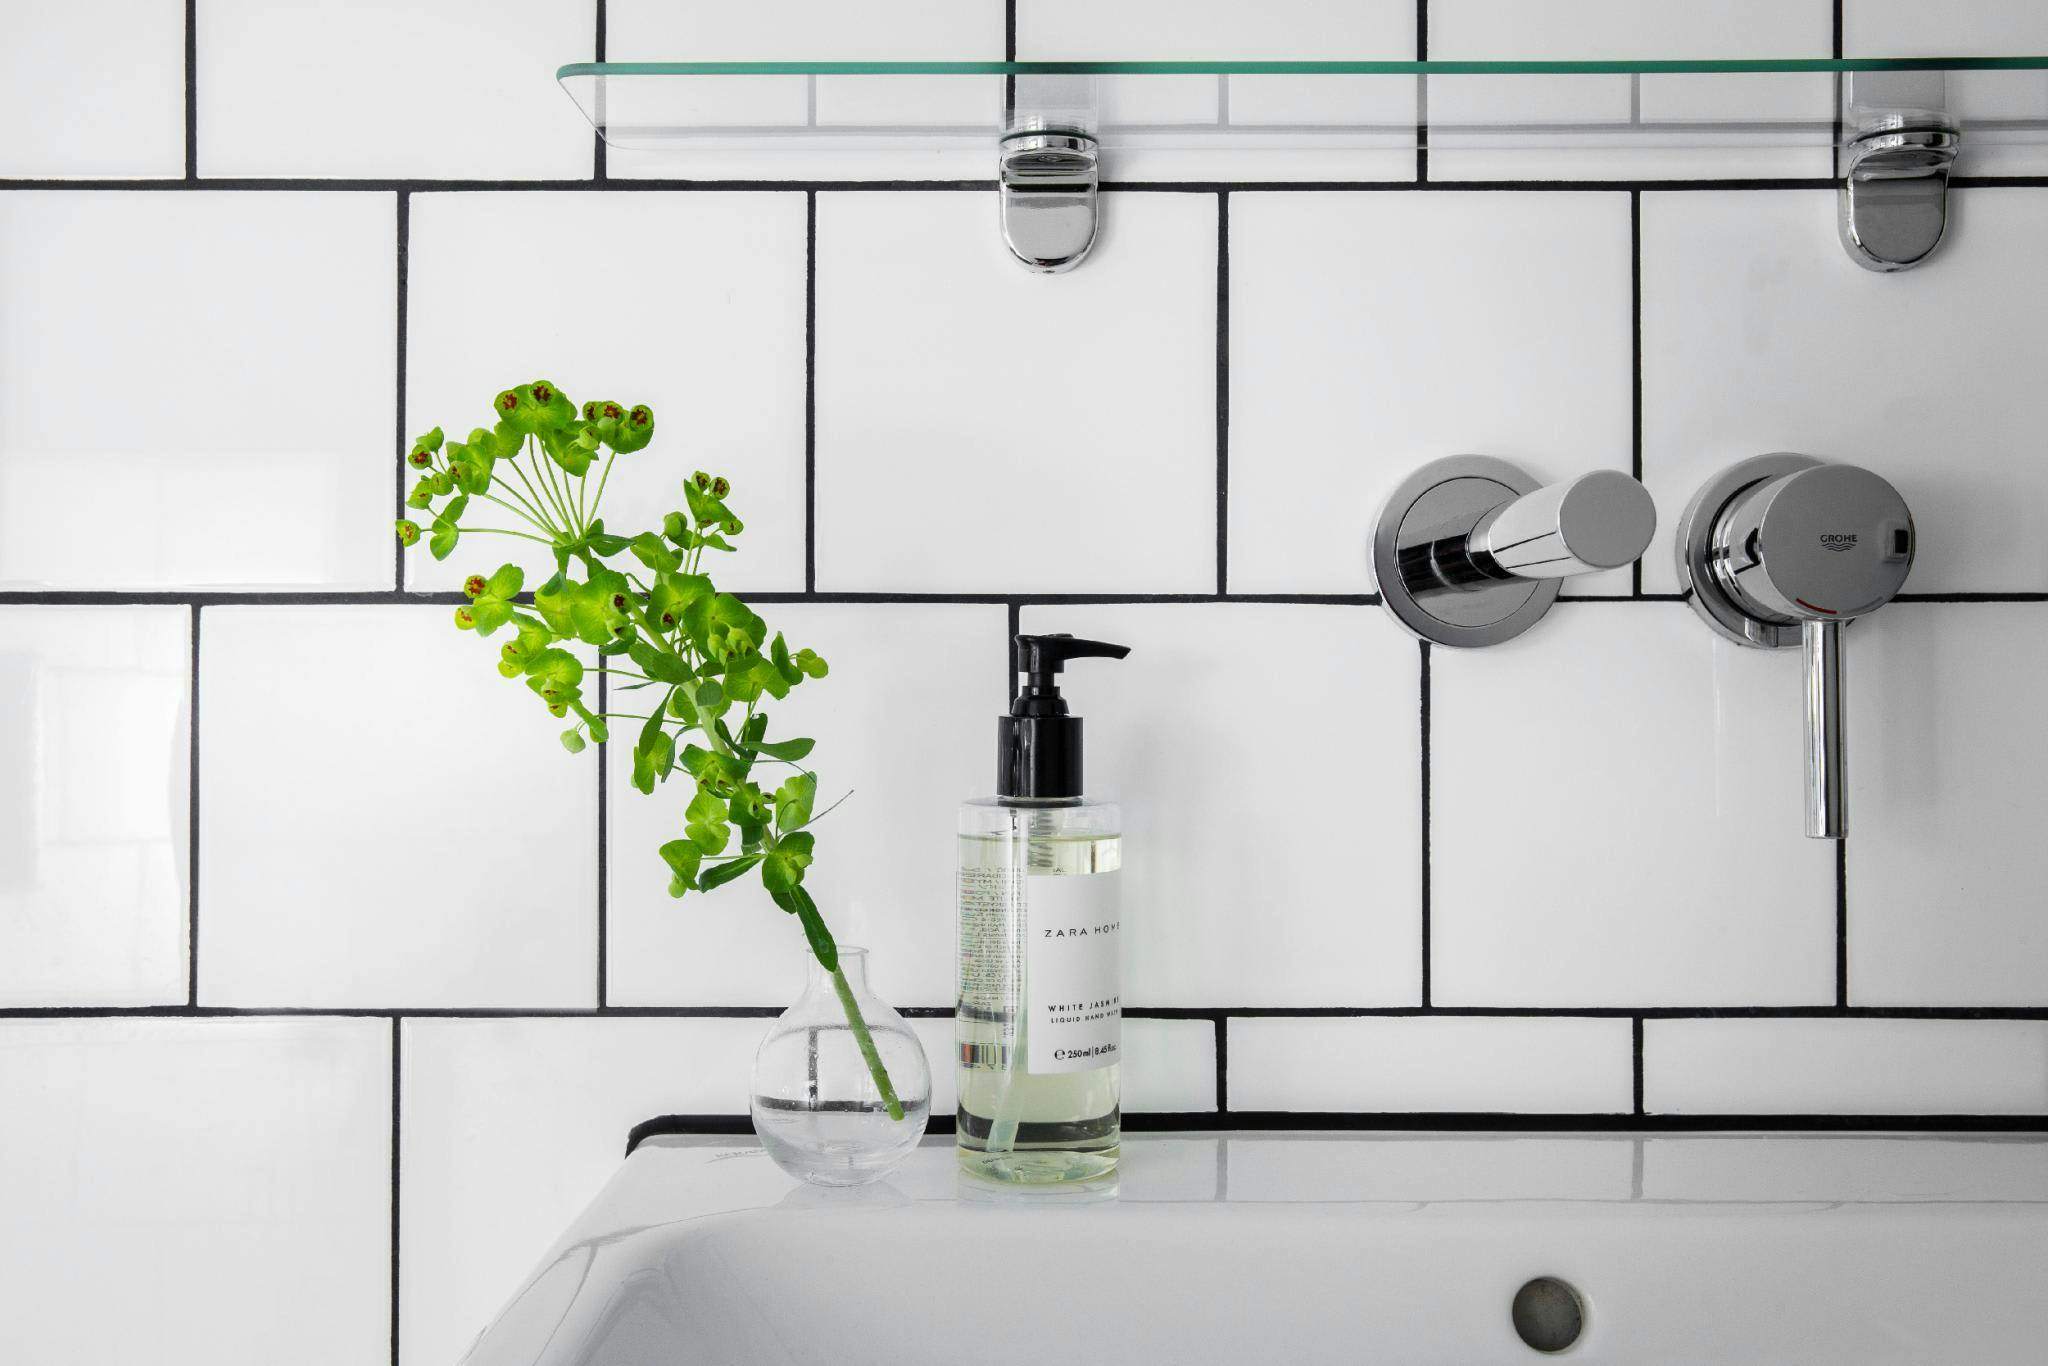 The image features a bathroom sink with a plant on the countertop, a bottle of soap, and a toothbrush.